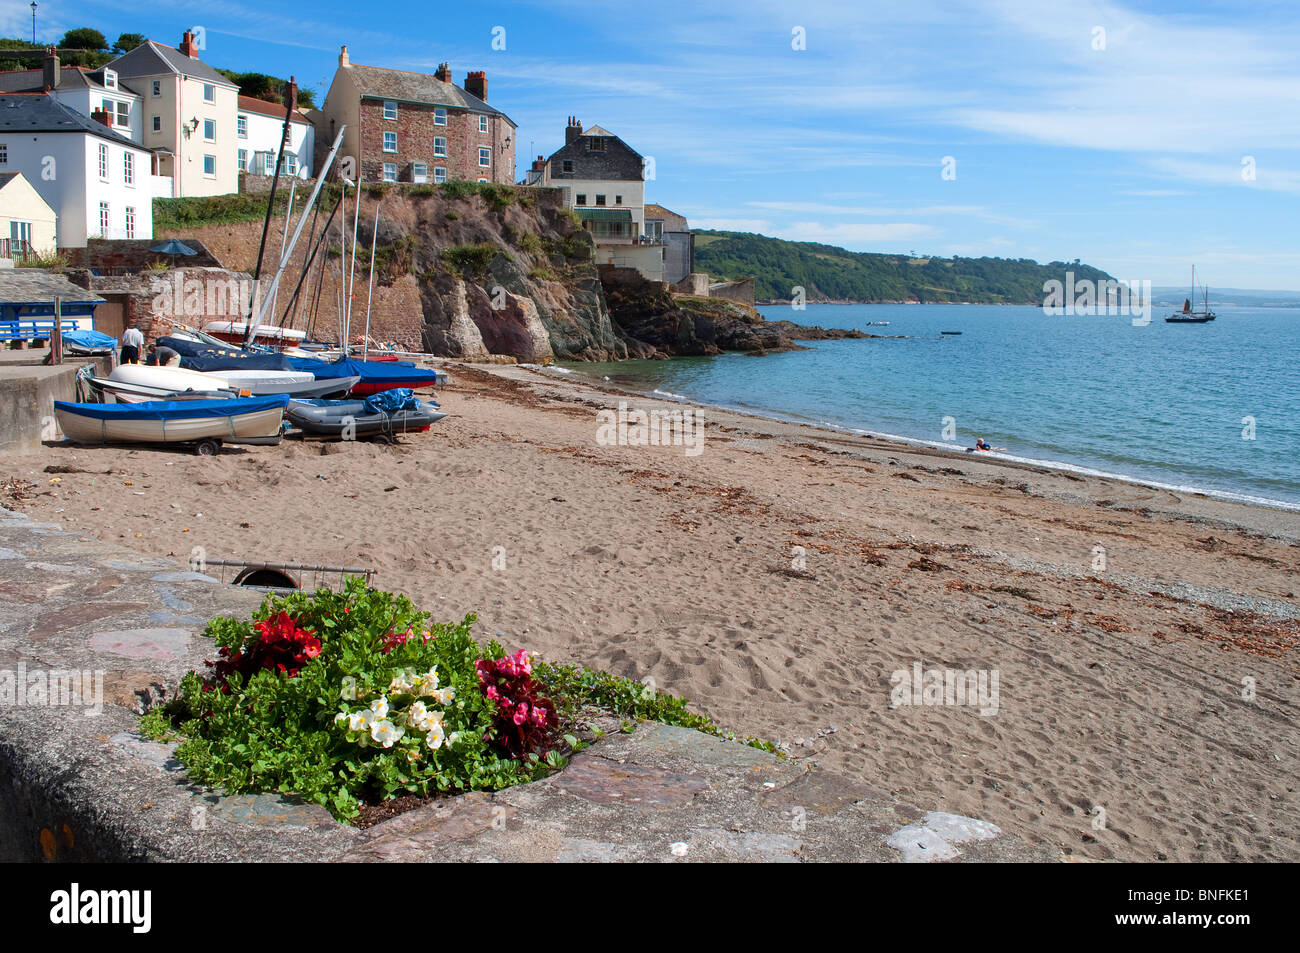 the small secluded beach at cawsand in cornwall, uk Stock Photo